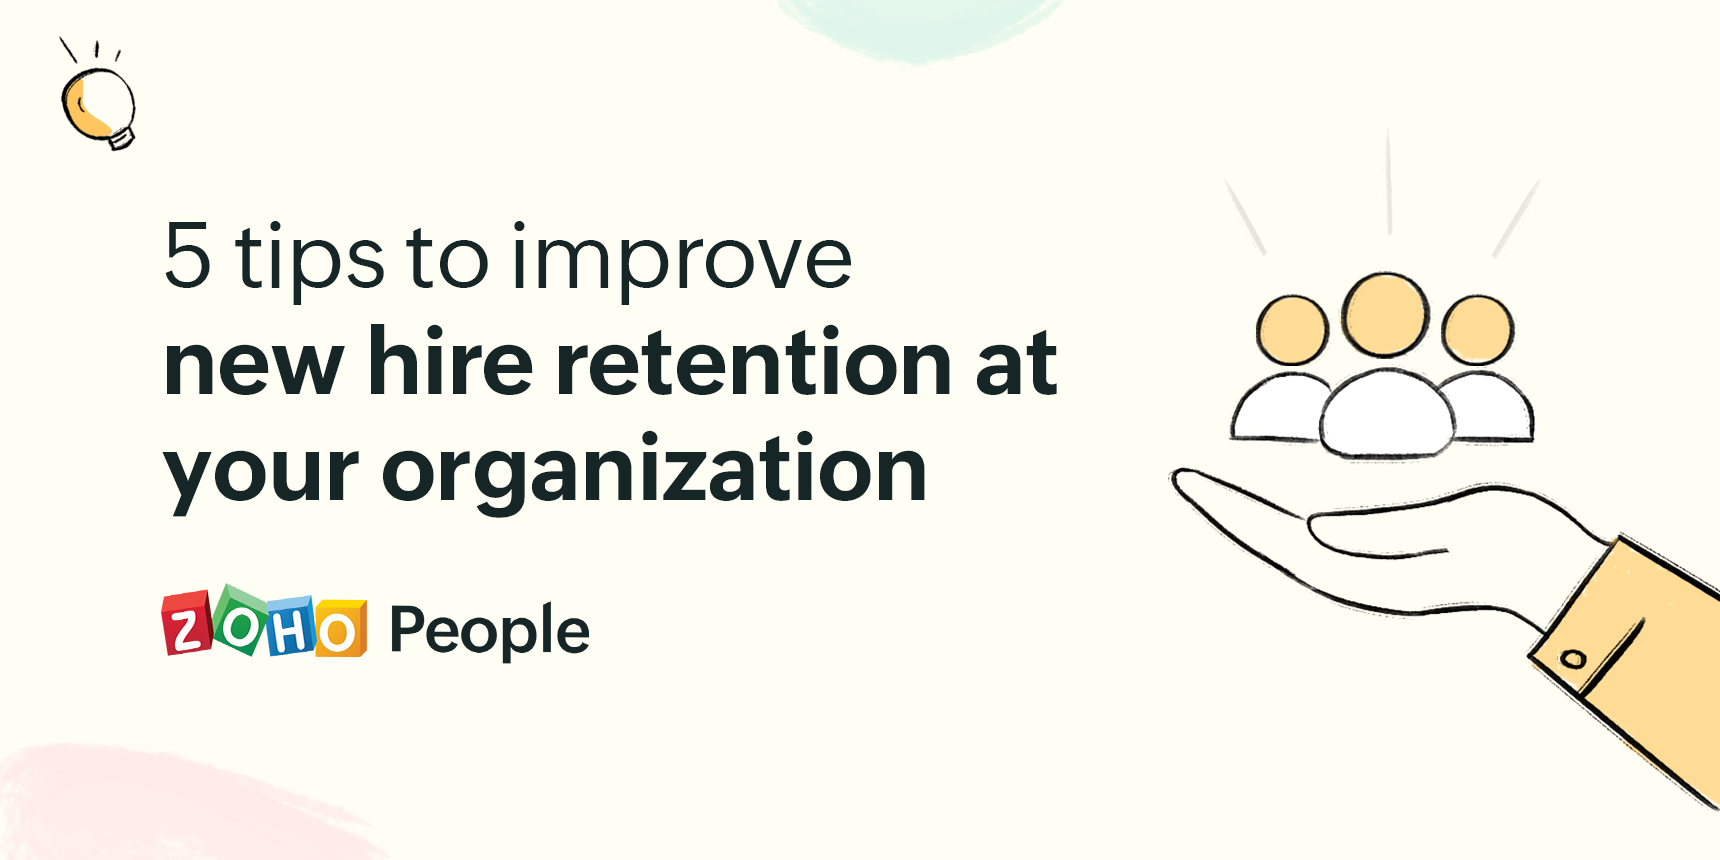 5 different ways to retain new hires at your organization